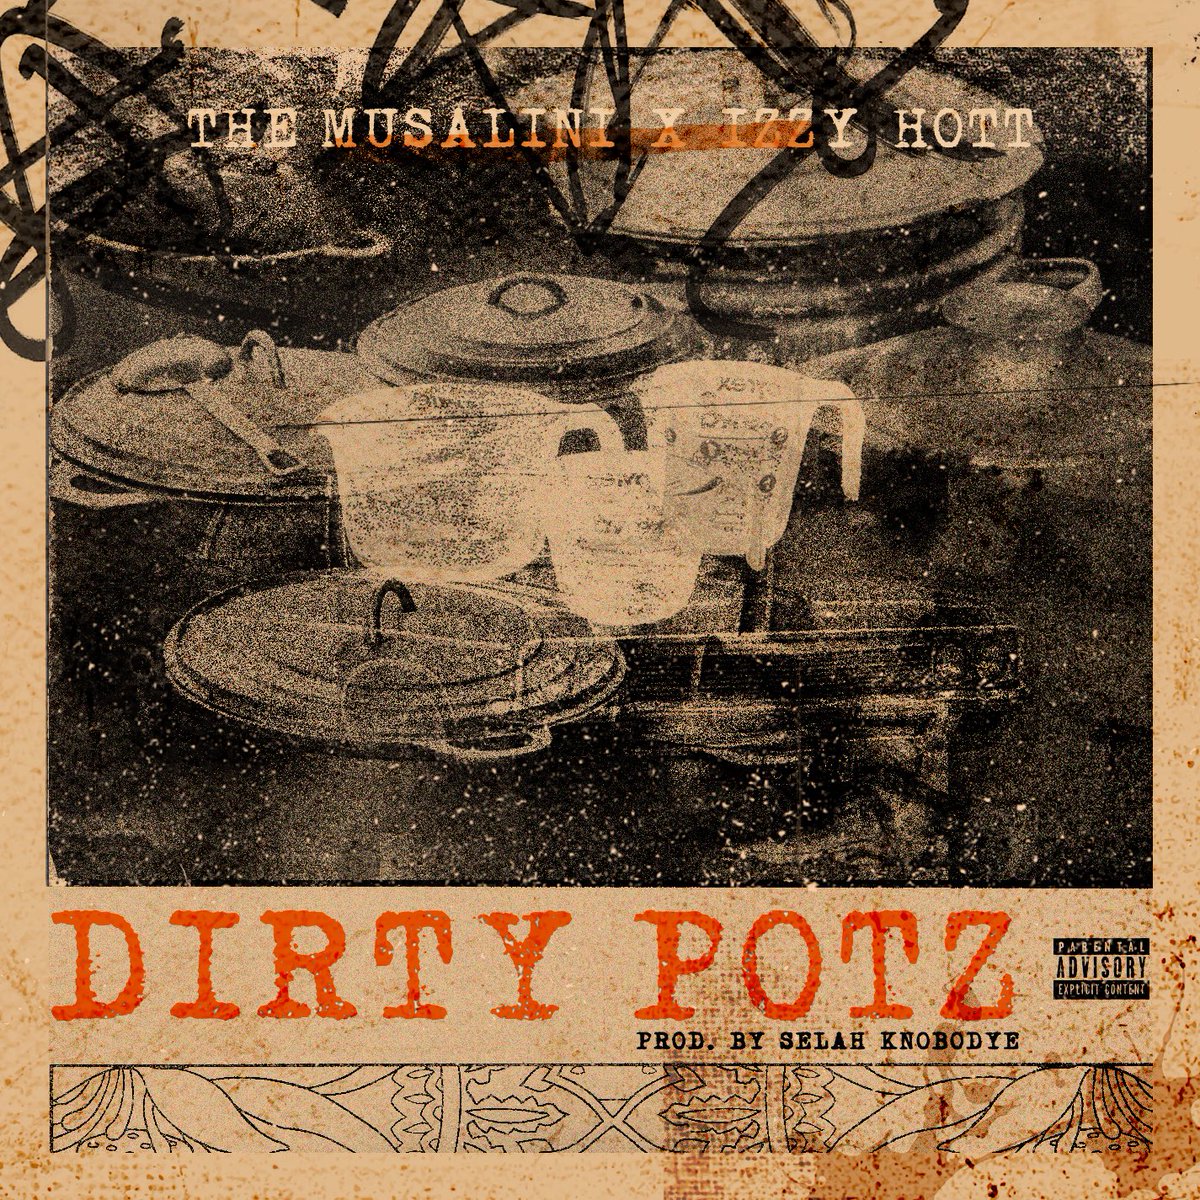 Been a long time coming. Hardwork is paying off in a major way. 

THE MUSALINI X IZZY HOTT
Dirty Potz
Prod. by Selah Knobodye 

@TheMusalini  #IzzyHott 

#themusalini #izzyhott #nyrap #realrap #rawimperial #rawart